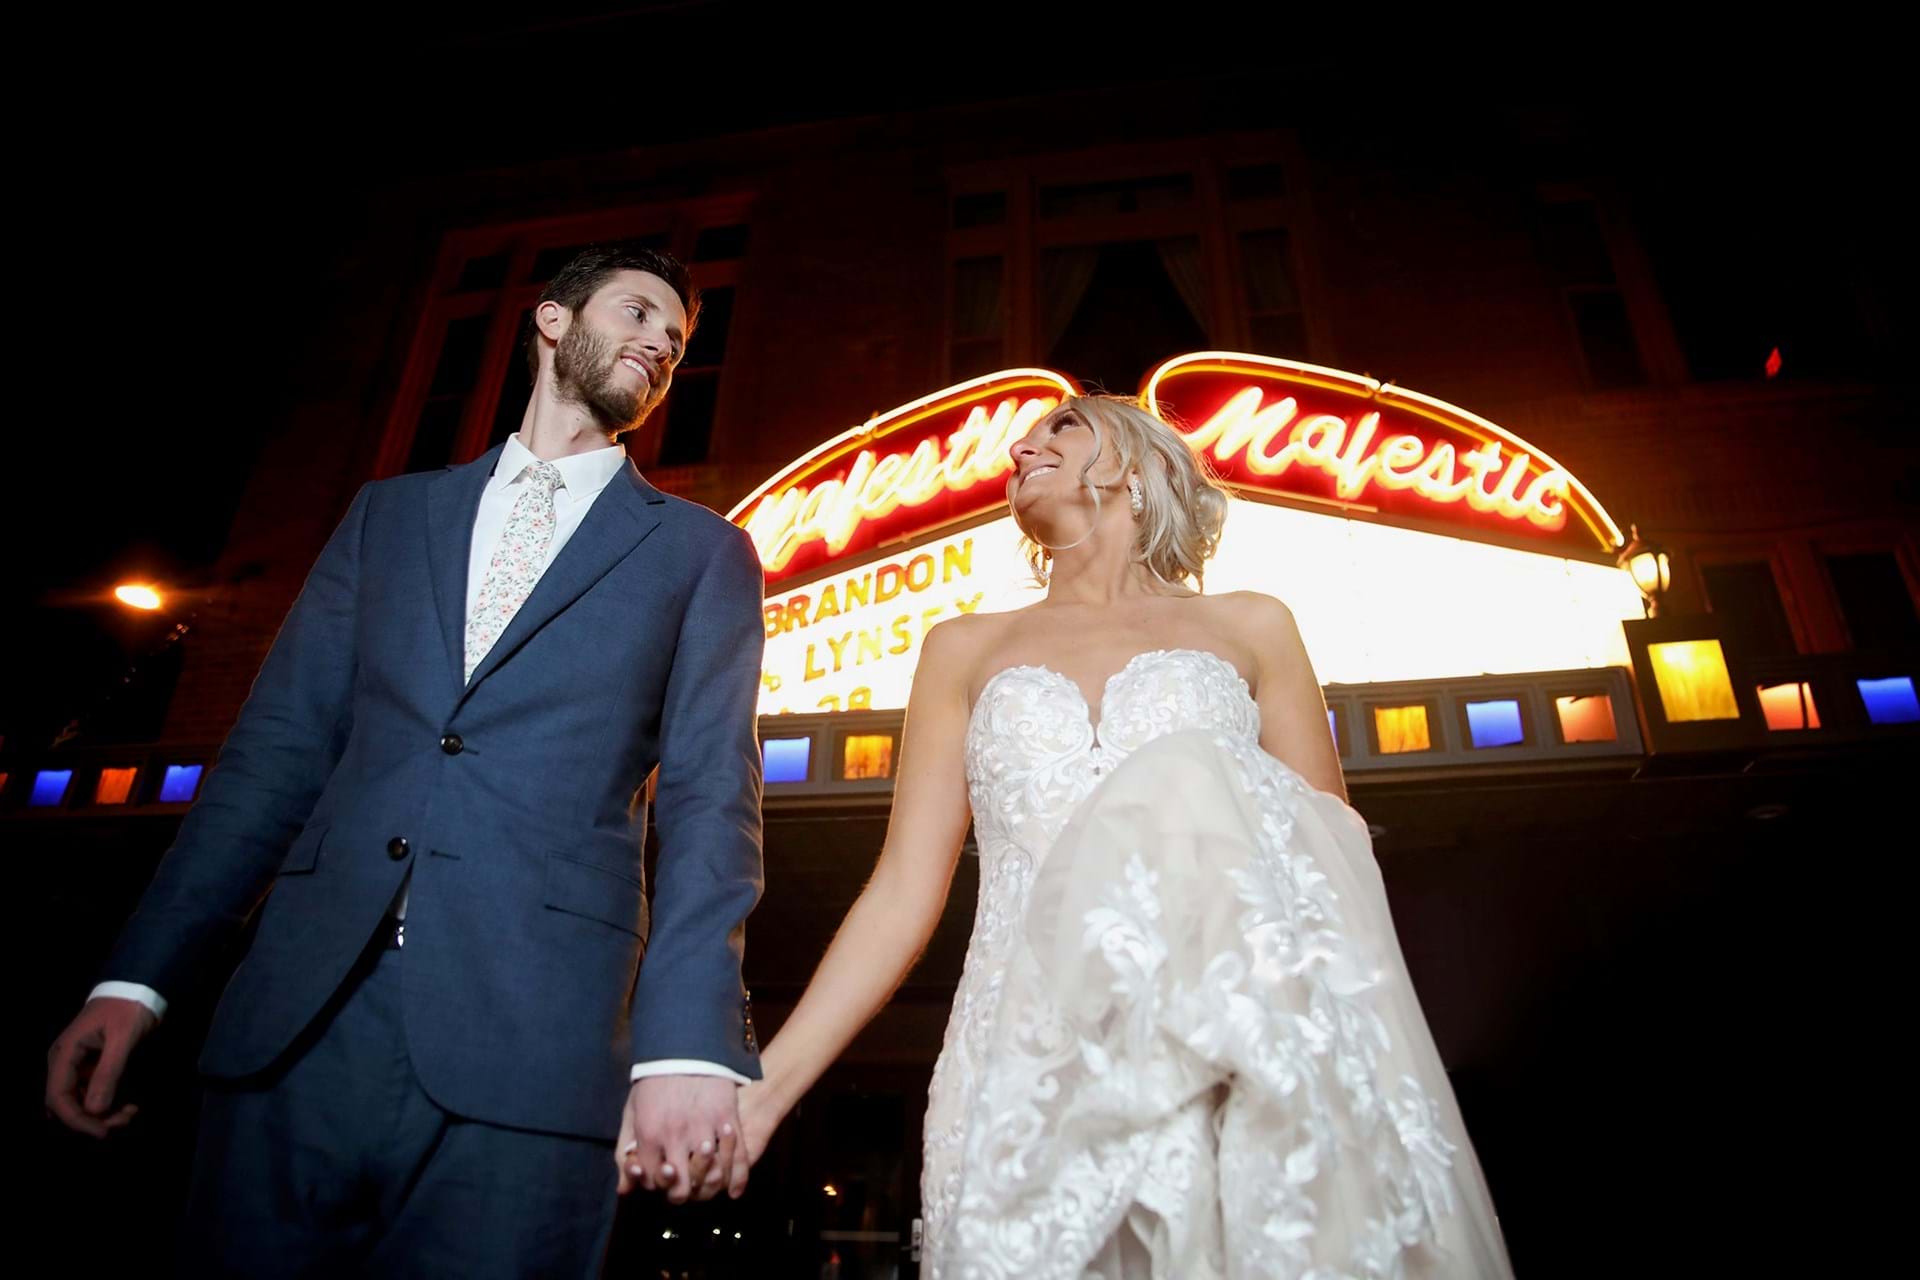 At The Majestic Theater, couples can enjoy seeing a custom marquee message in lights for their big event.